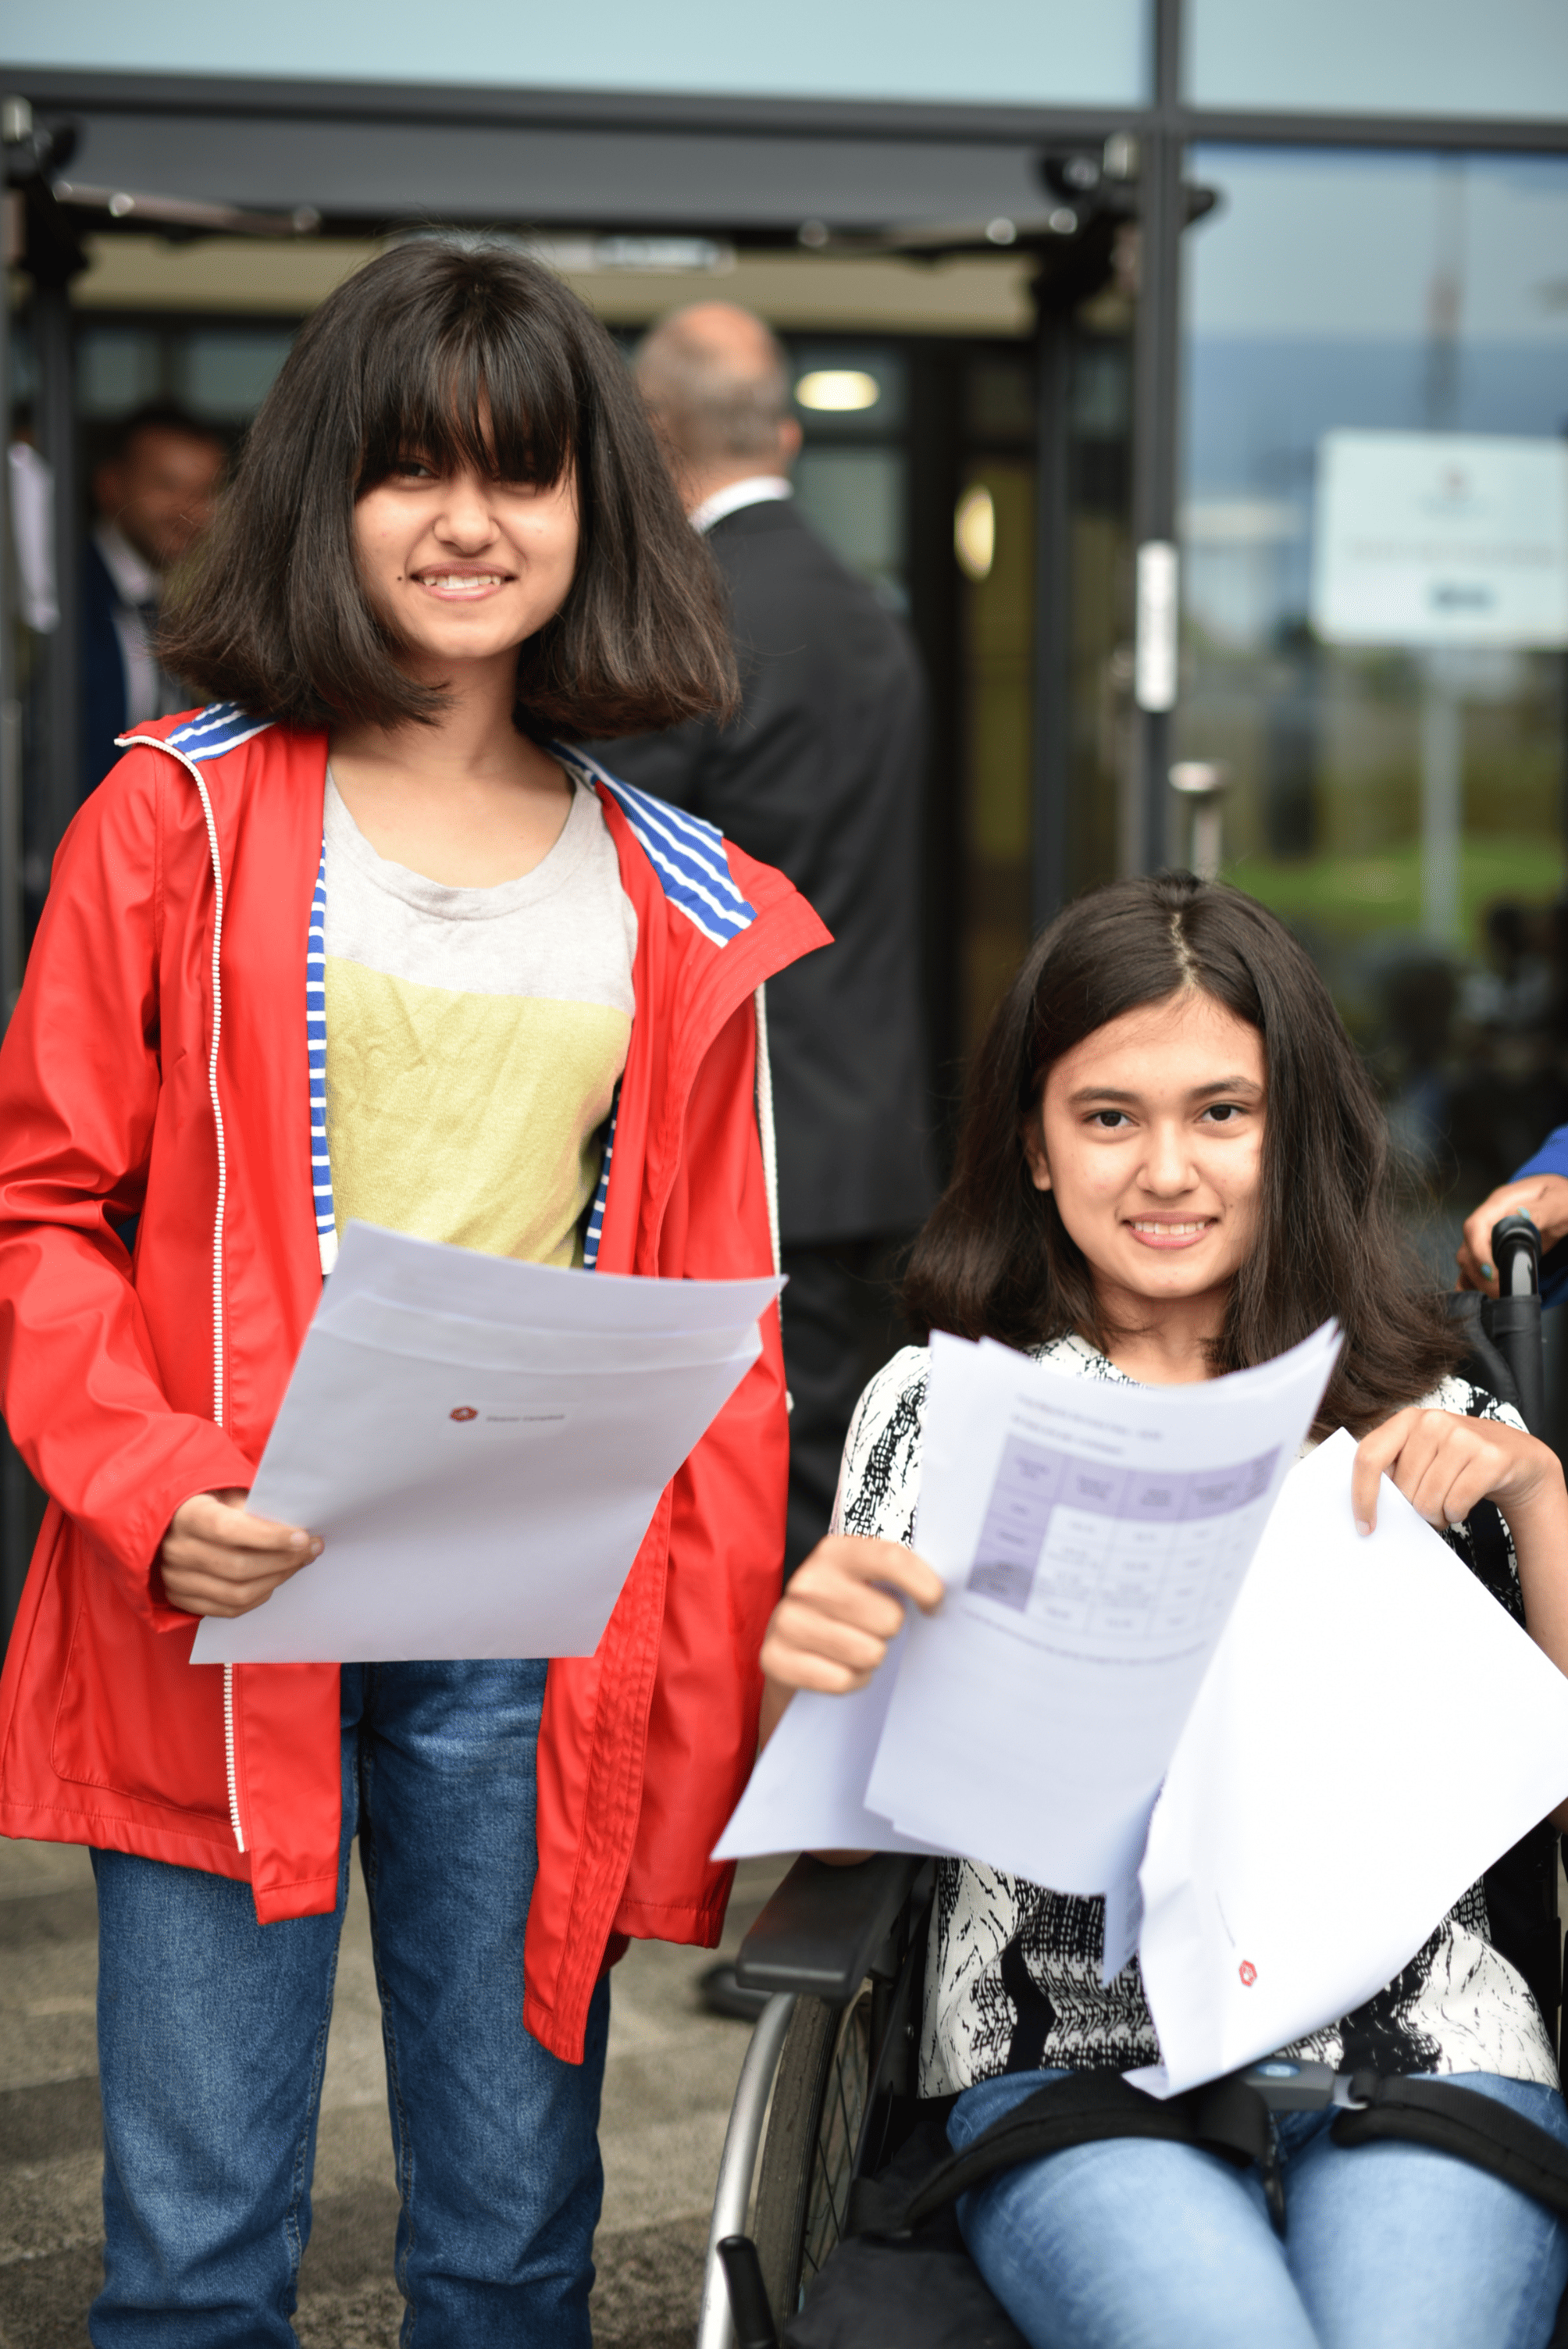 Two Didsbury High School students open their GCSE results.